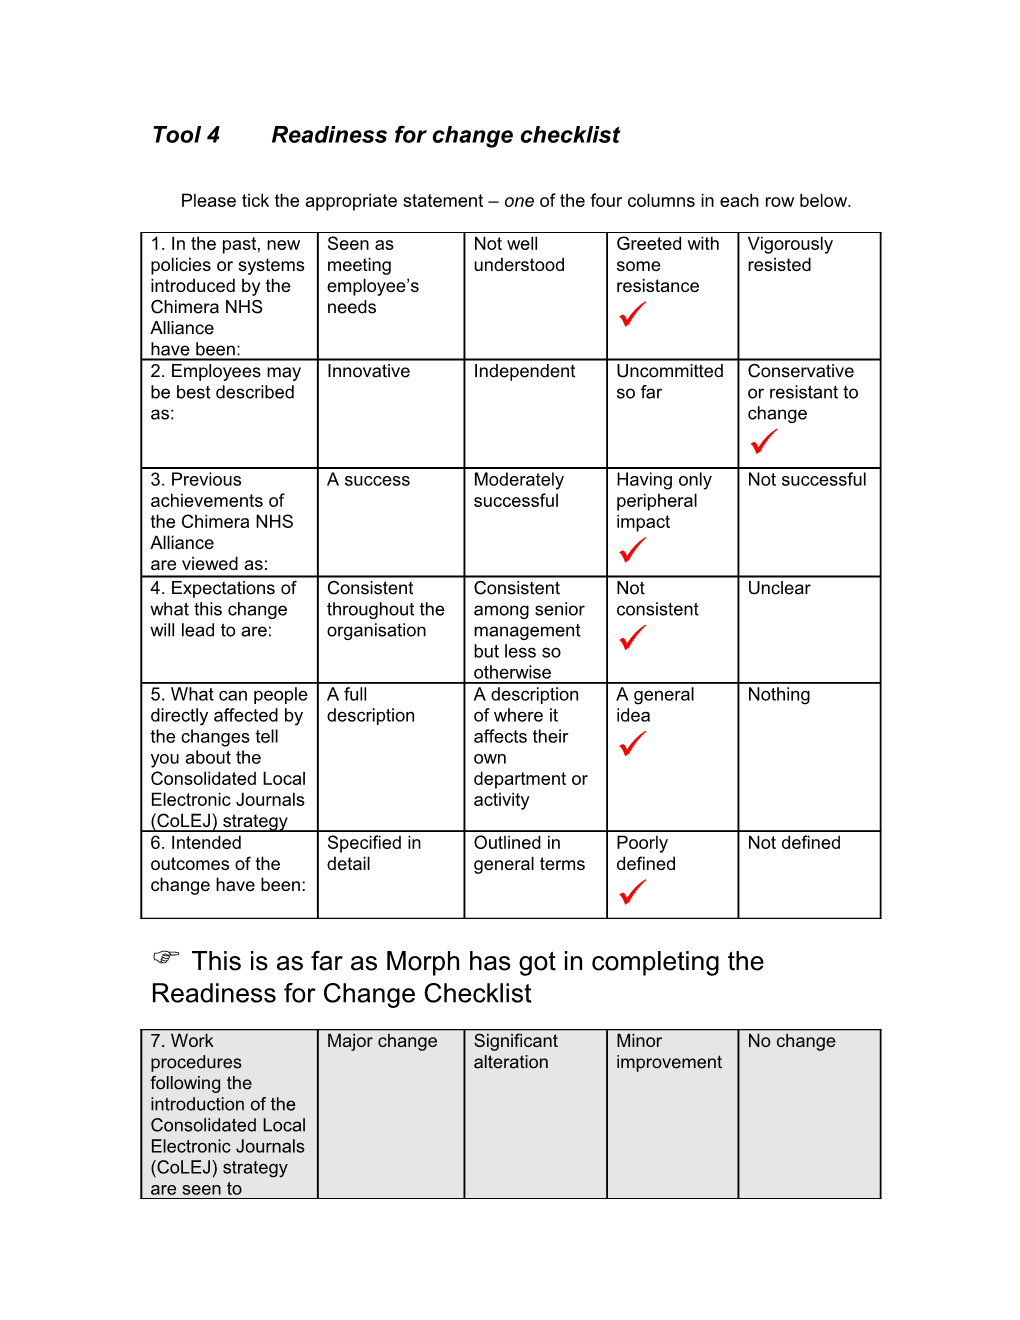 Tool 4Readiness for Change Checklist